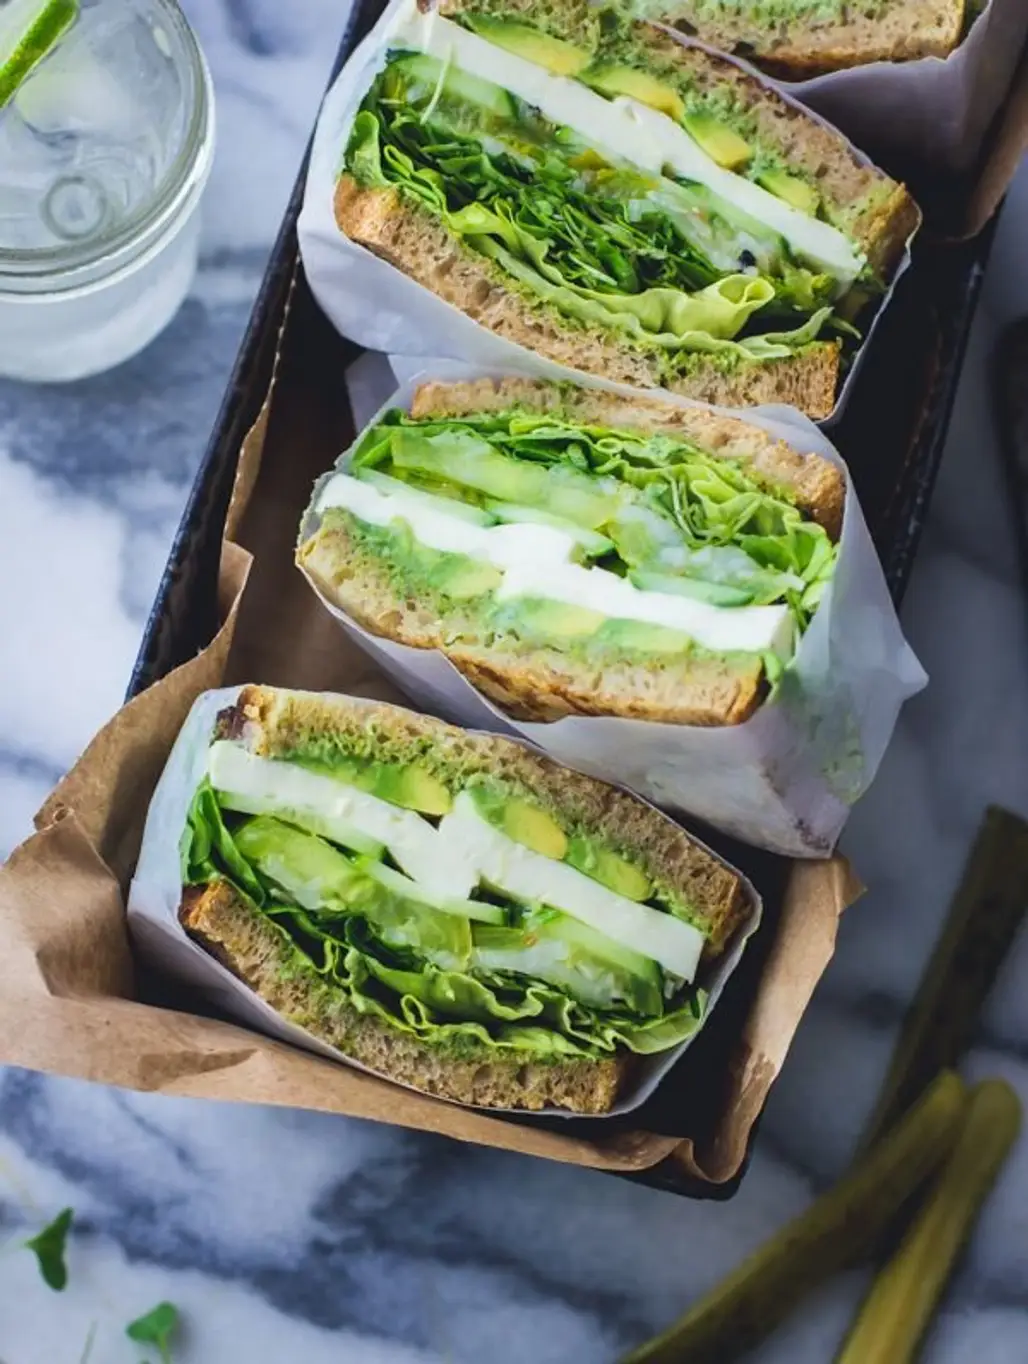 Eat like a Goddess with These Green Goddess Sandwiches